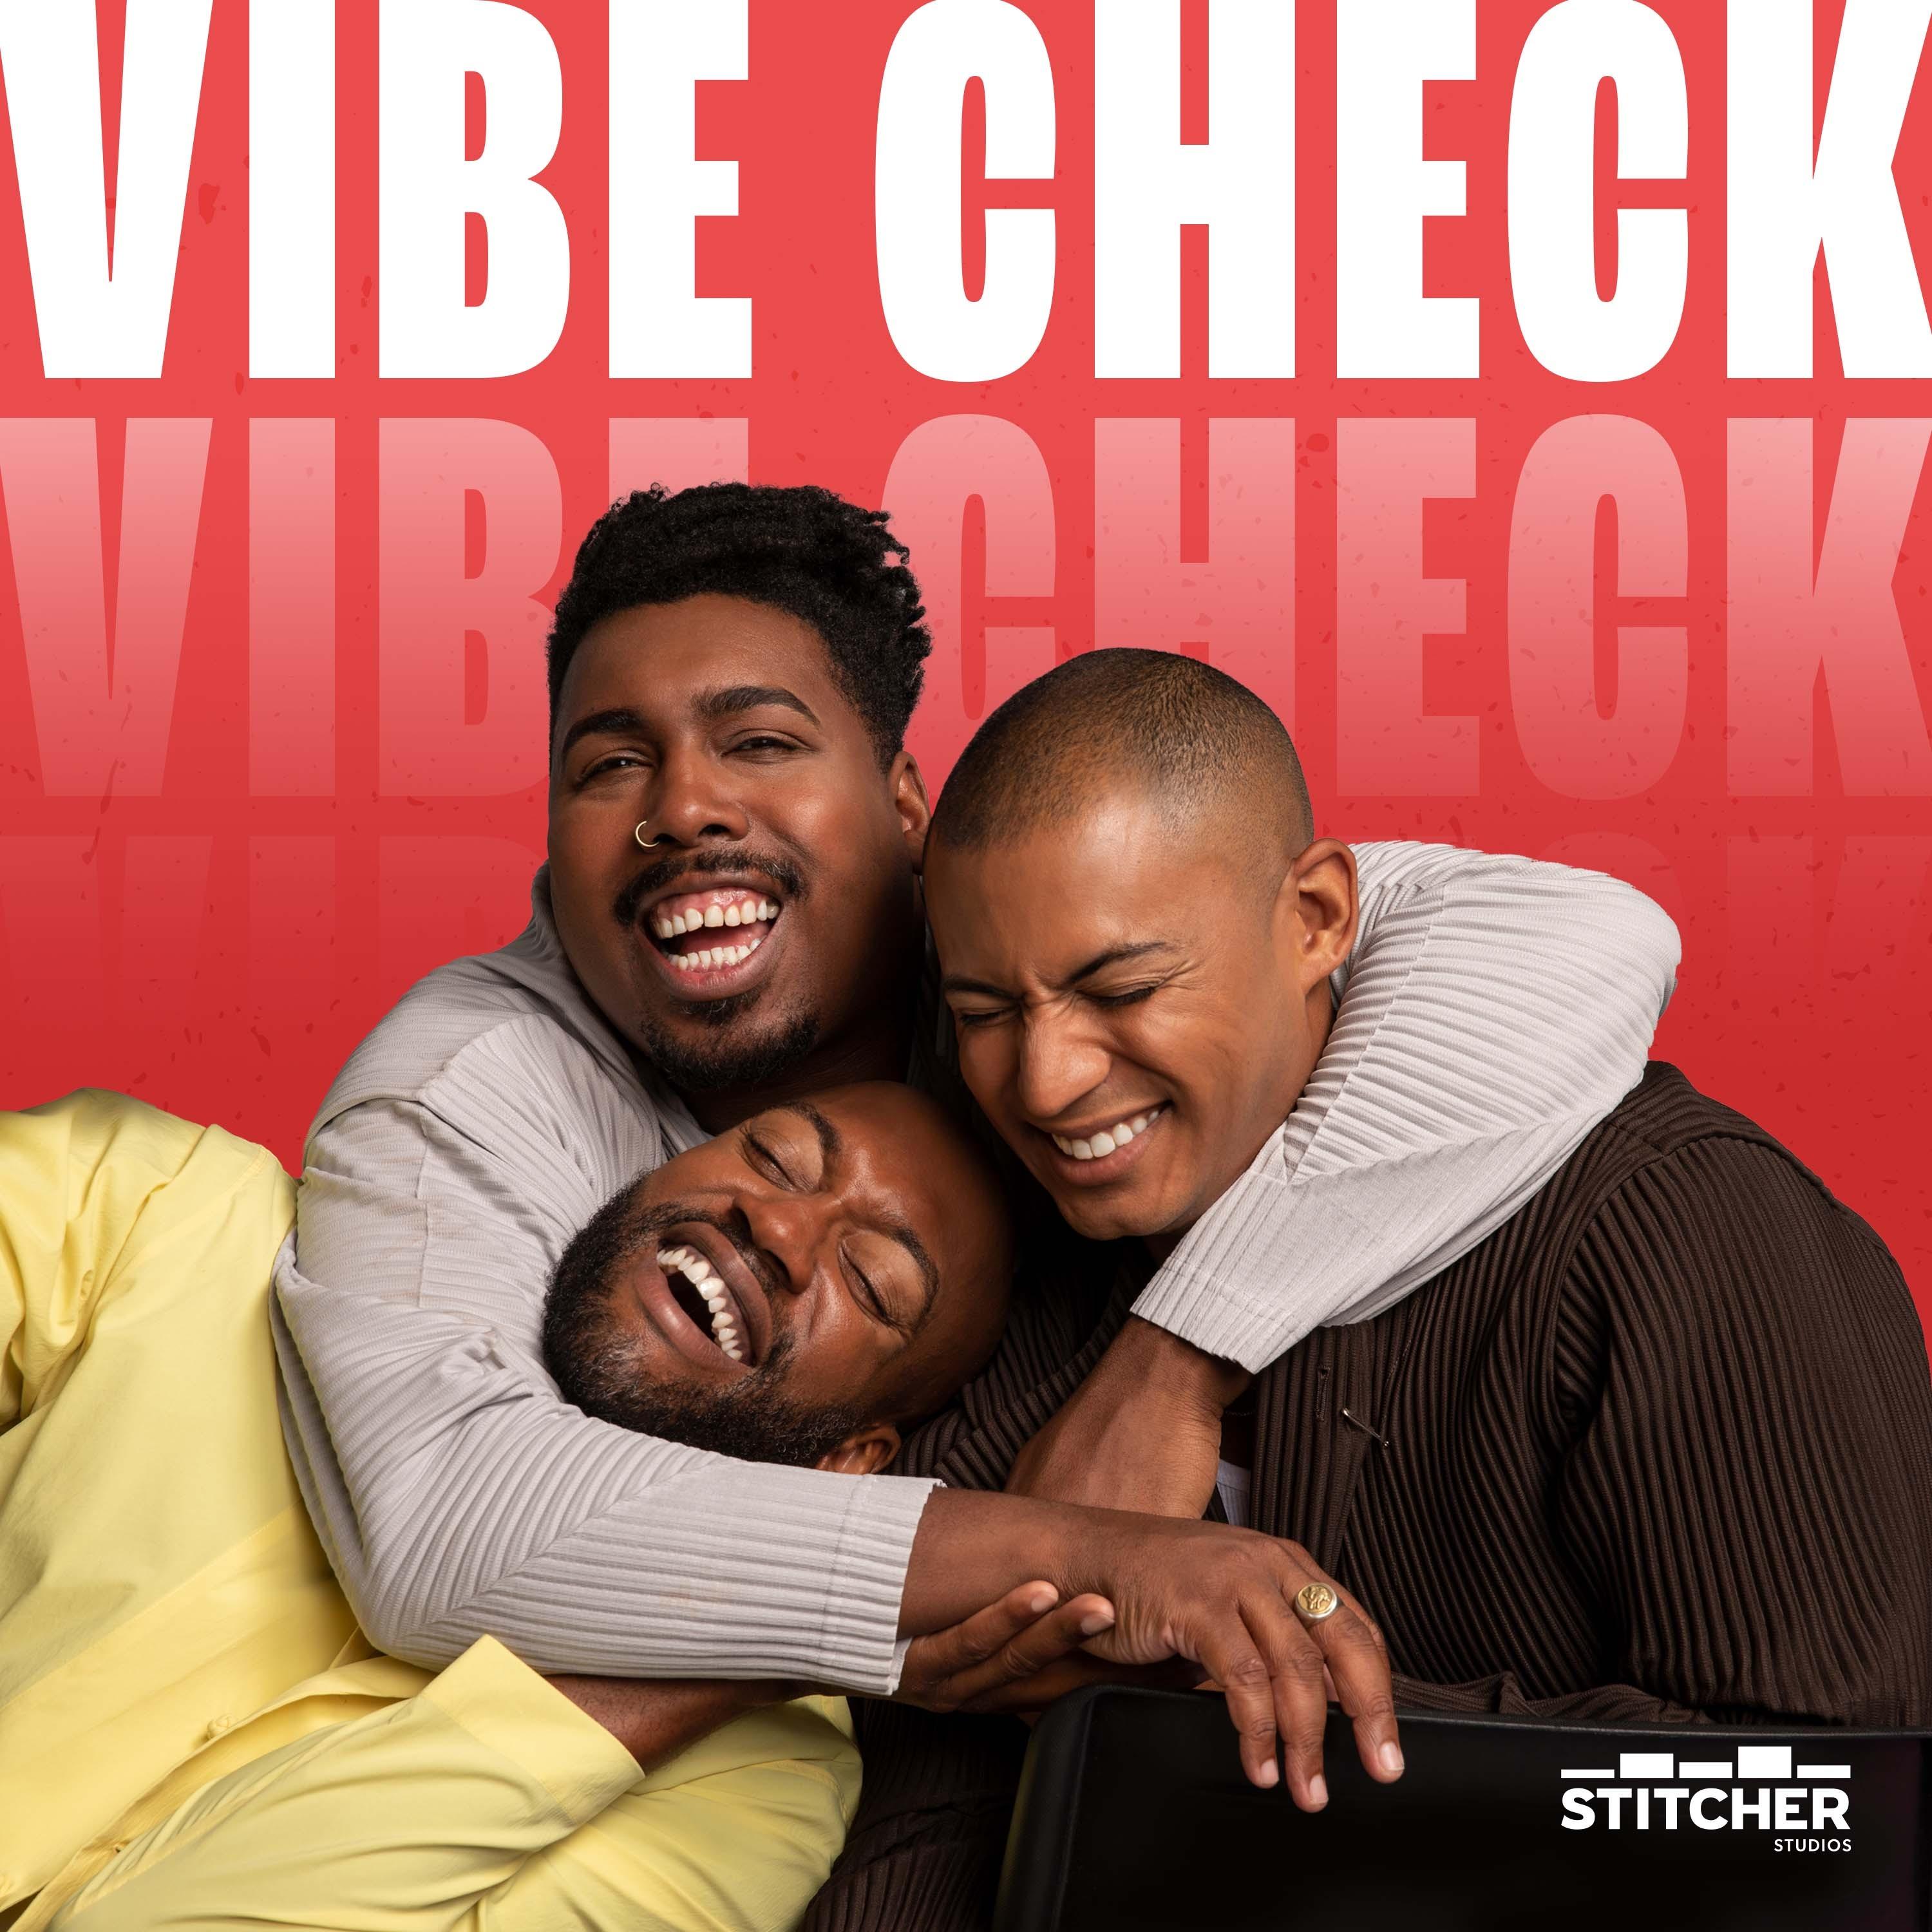 Show poster of Vibe Check